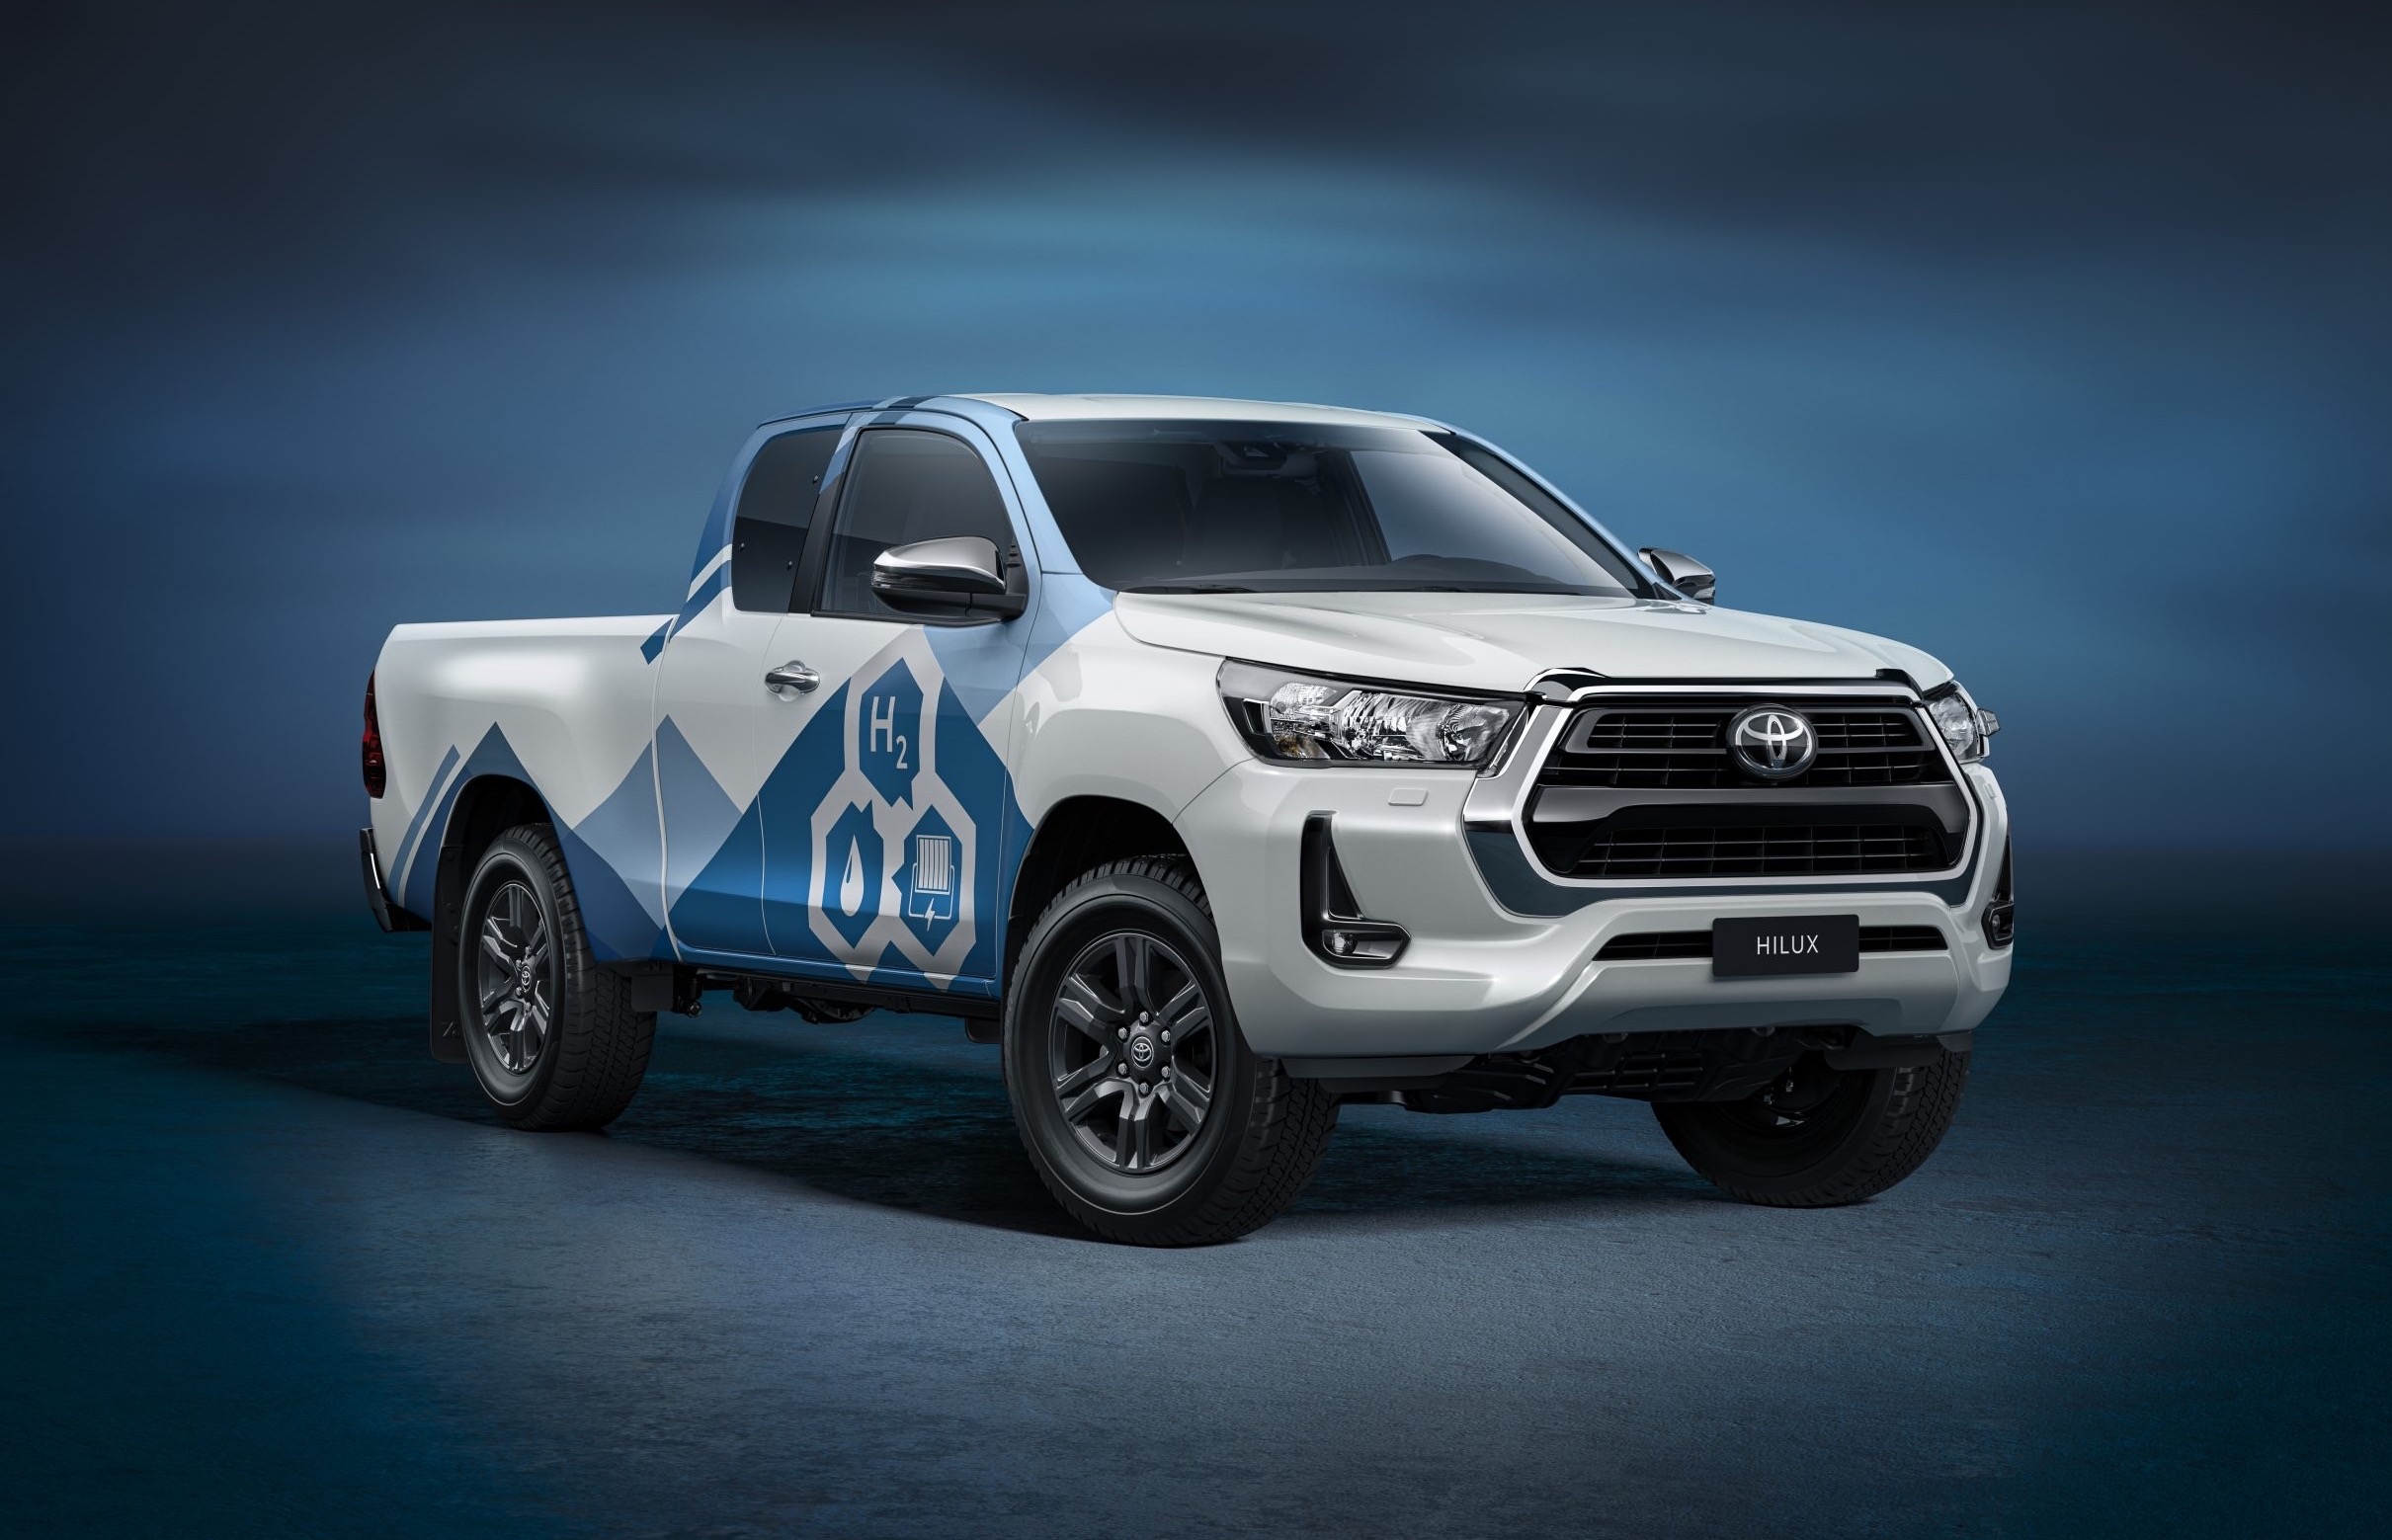 Development begins on hydrogen fuel cell Toyota HiLux in the UK